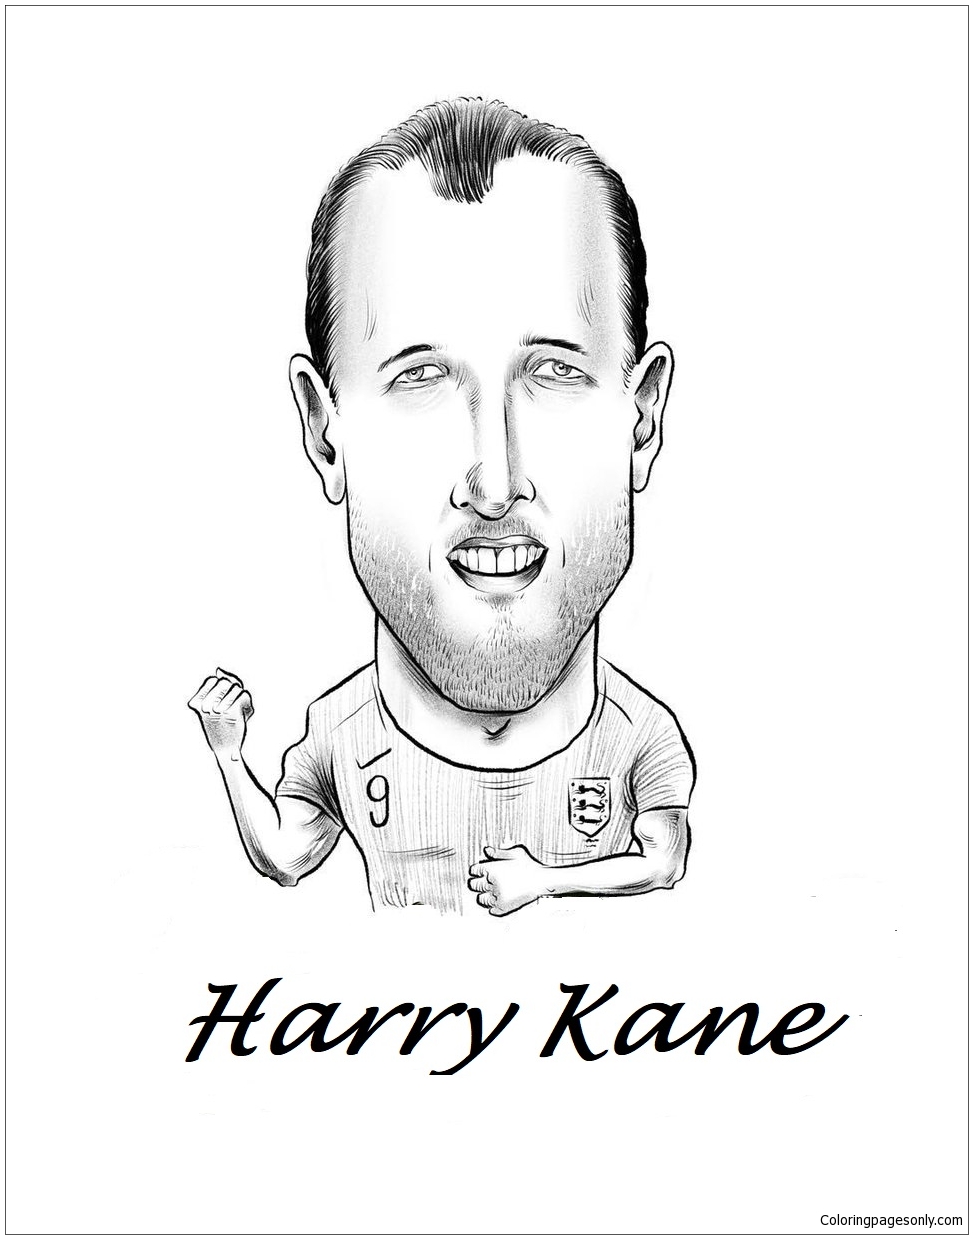 Harry Kane-image 6 Coloring Pages